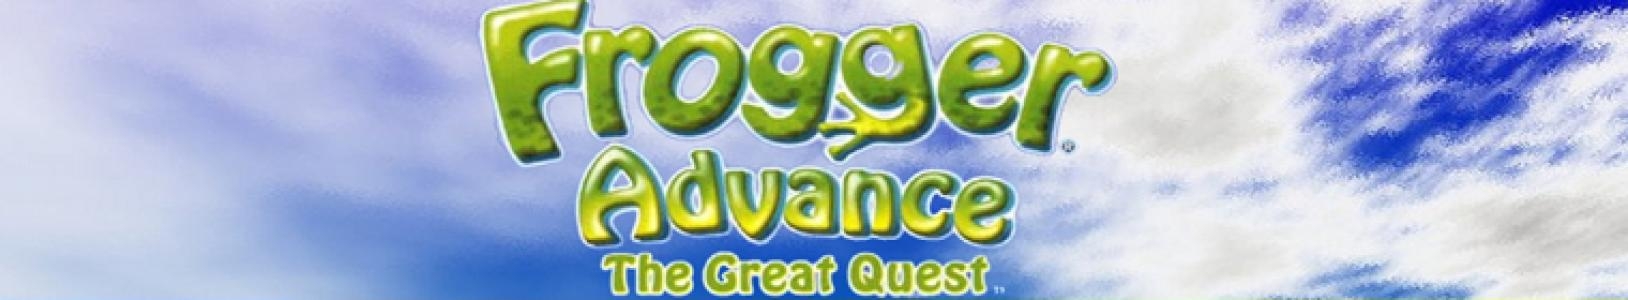 Frogger Advance: The Great Quest banner